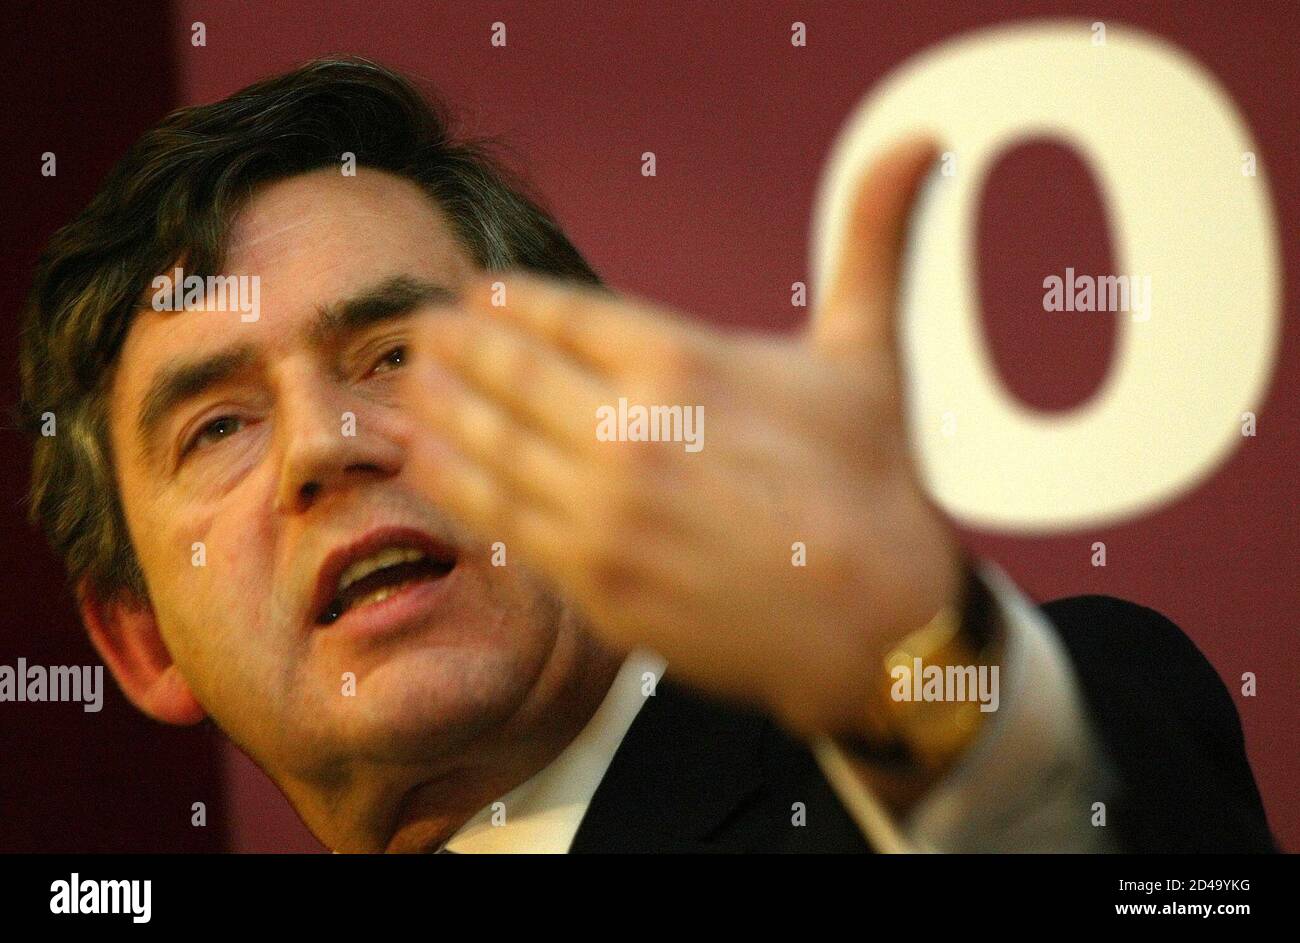 Britain's Chancellor of the Exchequer Gordon Brown addresses the Social Market Foundation in London February 3, 2003. Brown fought back in his address over accustations that he had lost control of public finances and the British economy stating that 'The true test of a policy is whether it can cope with diffucult as well as good times'. REUTERS/John Pryke  JDP/NMB Stock Photo